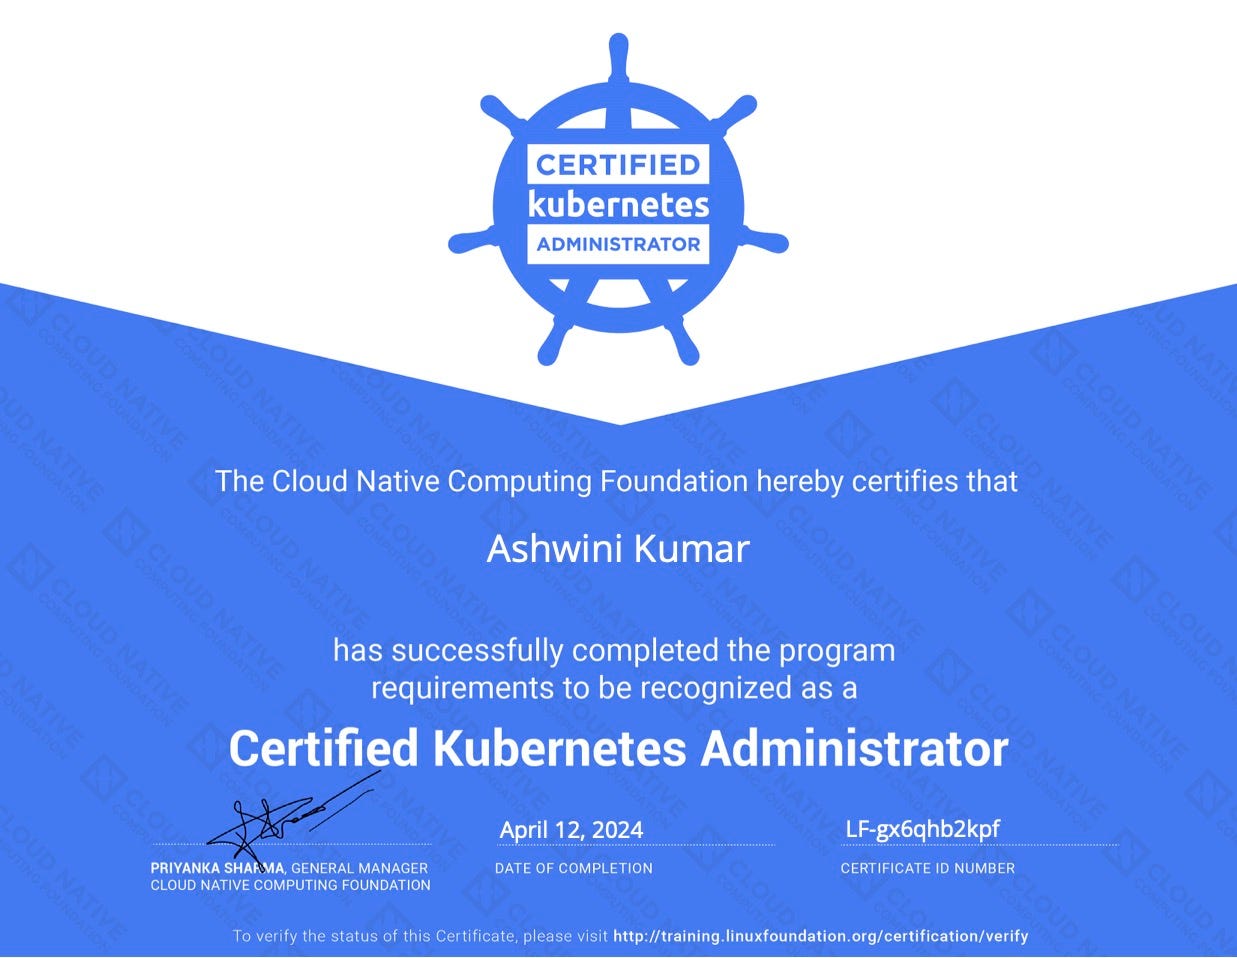 Earners of this designation demonstrated the skills, knowledge and competencies to perform the responsibilities of a Kubernetes Administrator. Earners demonstrated proficiency in Application Lifecycle Management, Installation, Configuration & Validation, Core Concepts, Networking, Scheduling, Security, Cluster Maintenance, Logging / Monitoring, Storage, and Troubleshooting